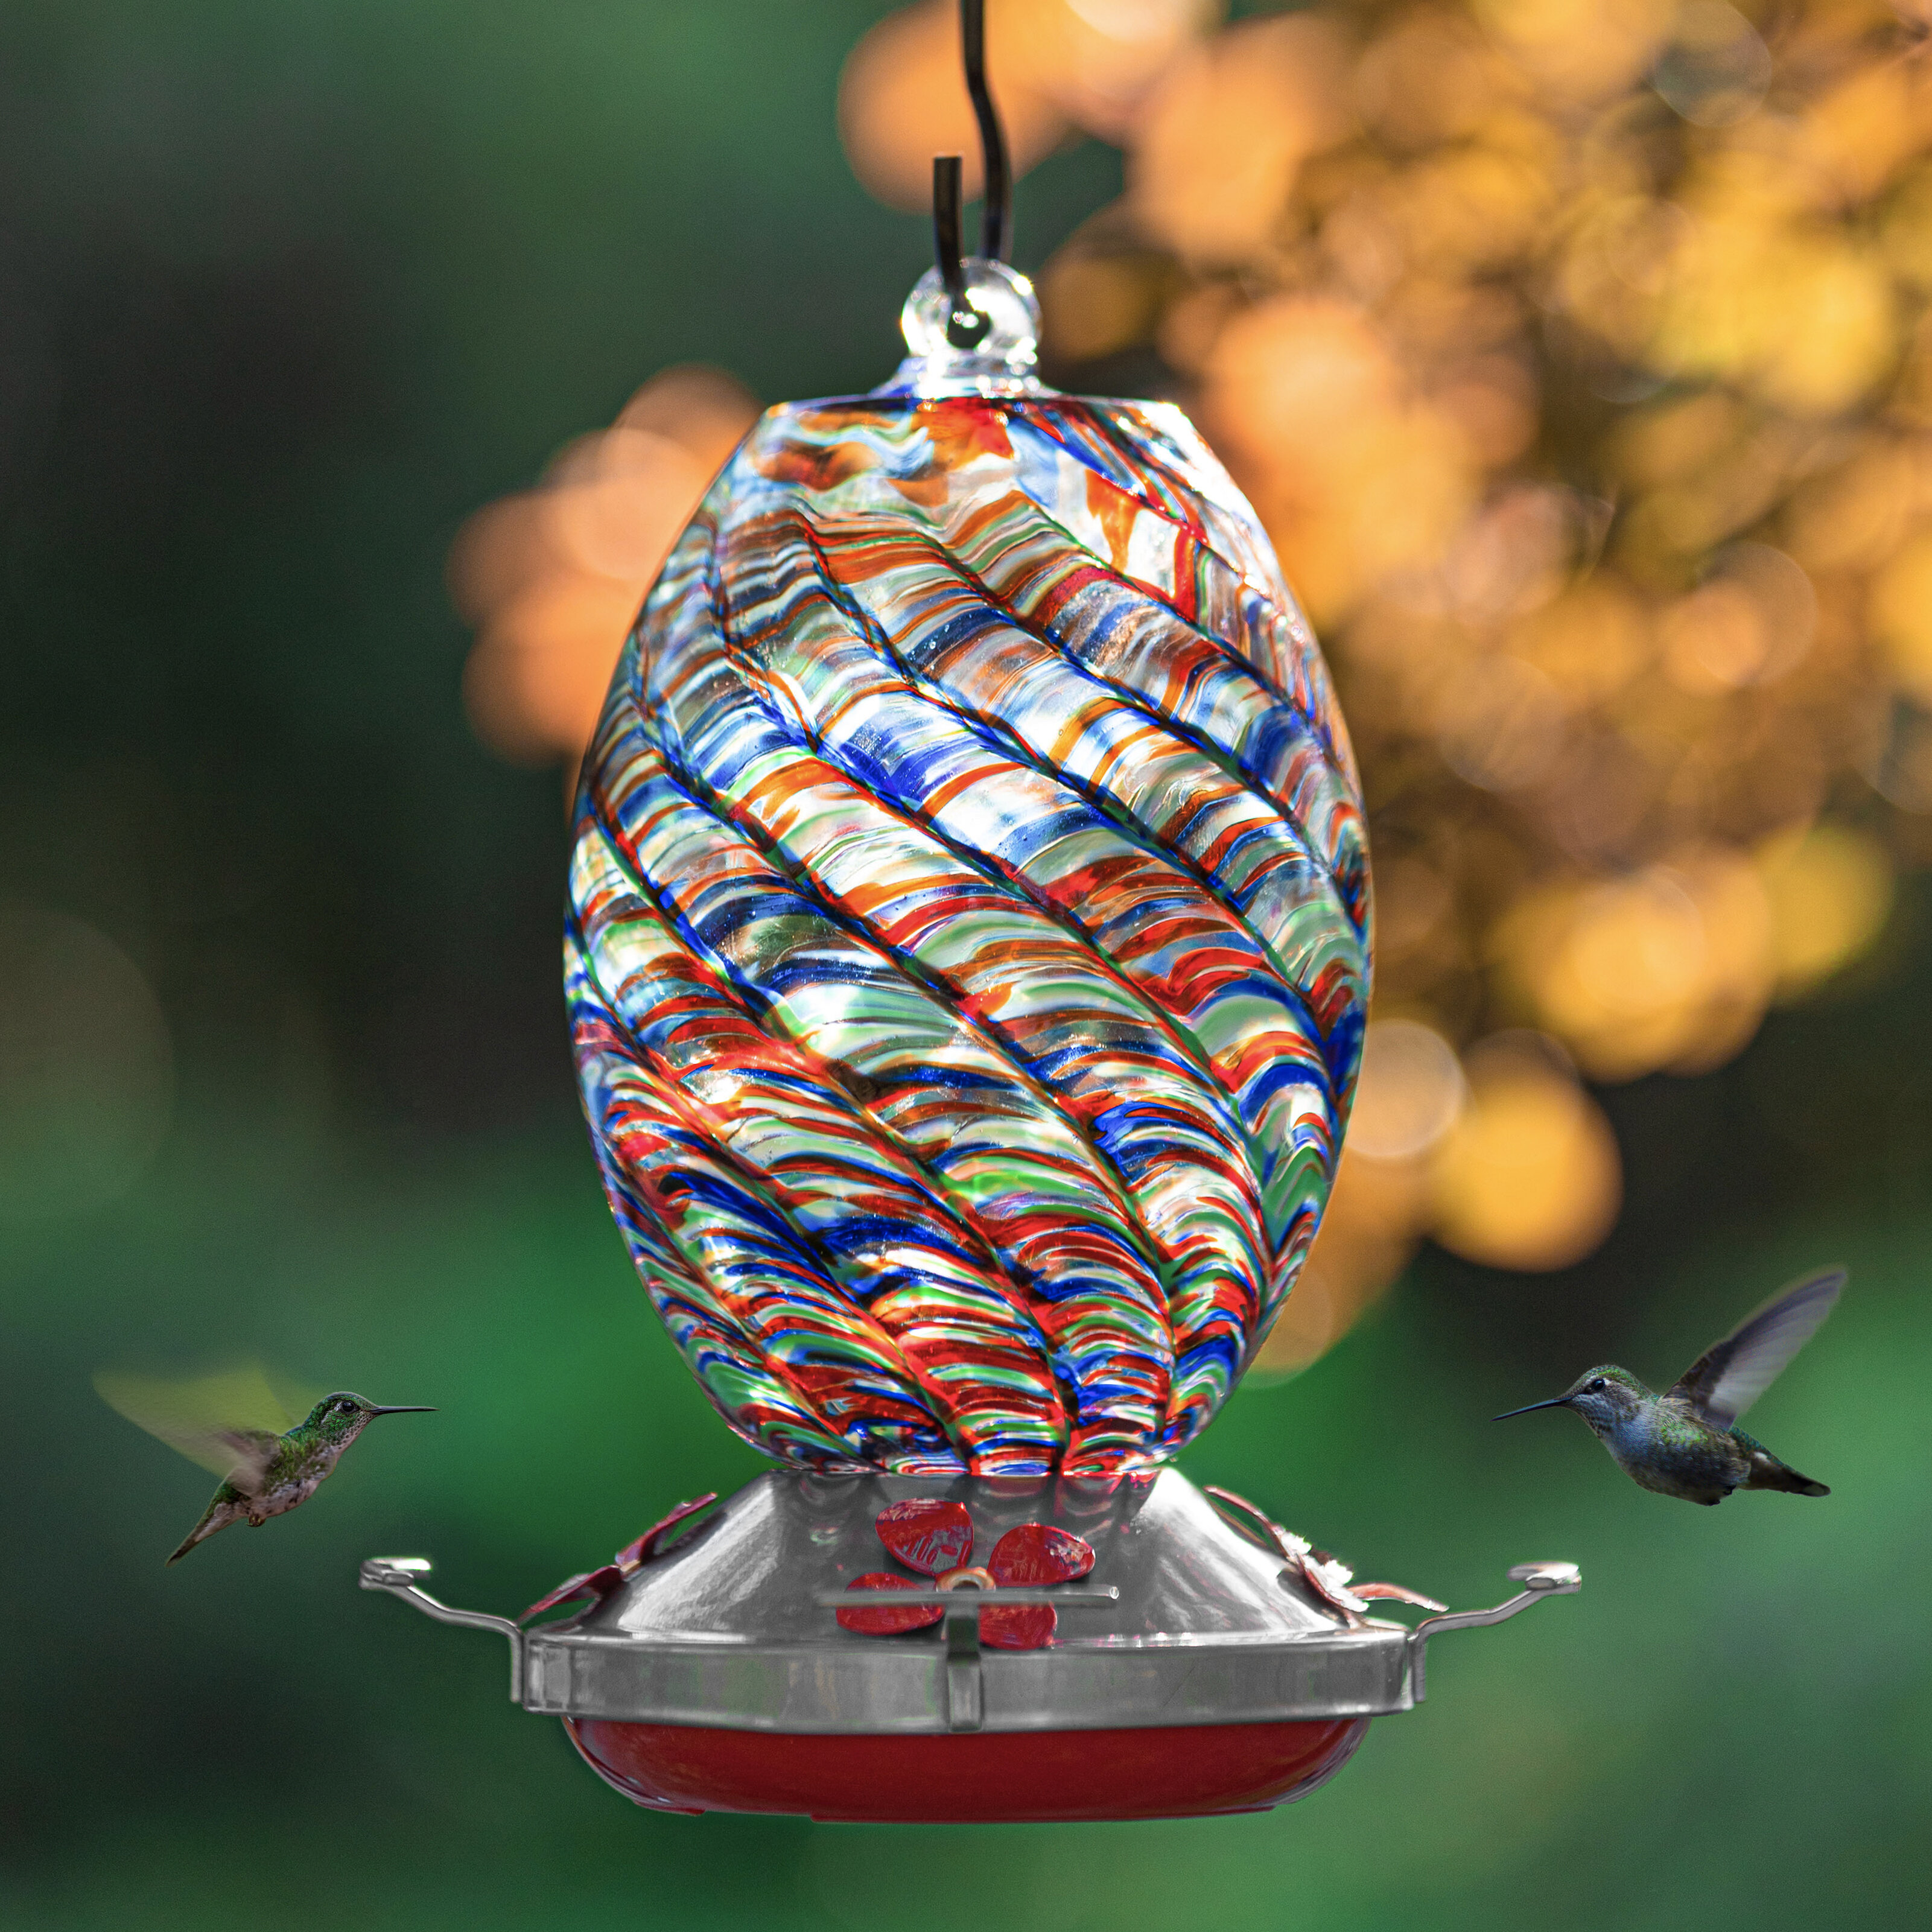 Hand Blown Glass Humming Bird Feeder Include Hanging Wires and Ant Moat Hummingbird Feeder for Outdoors 32 Fluid Ounces Premium Bird Feeders of Leak Proof and Non-Toxic with Luminous Mode